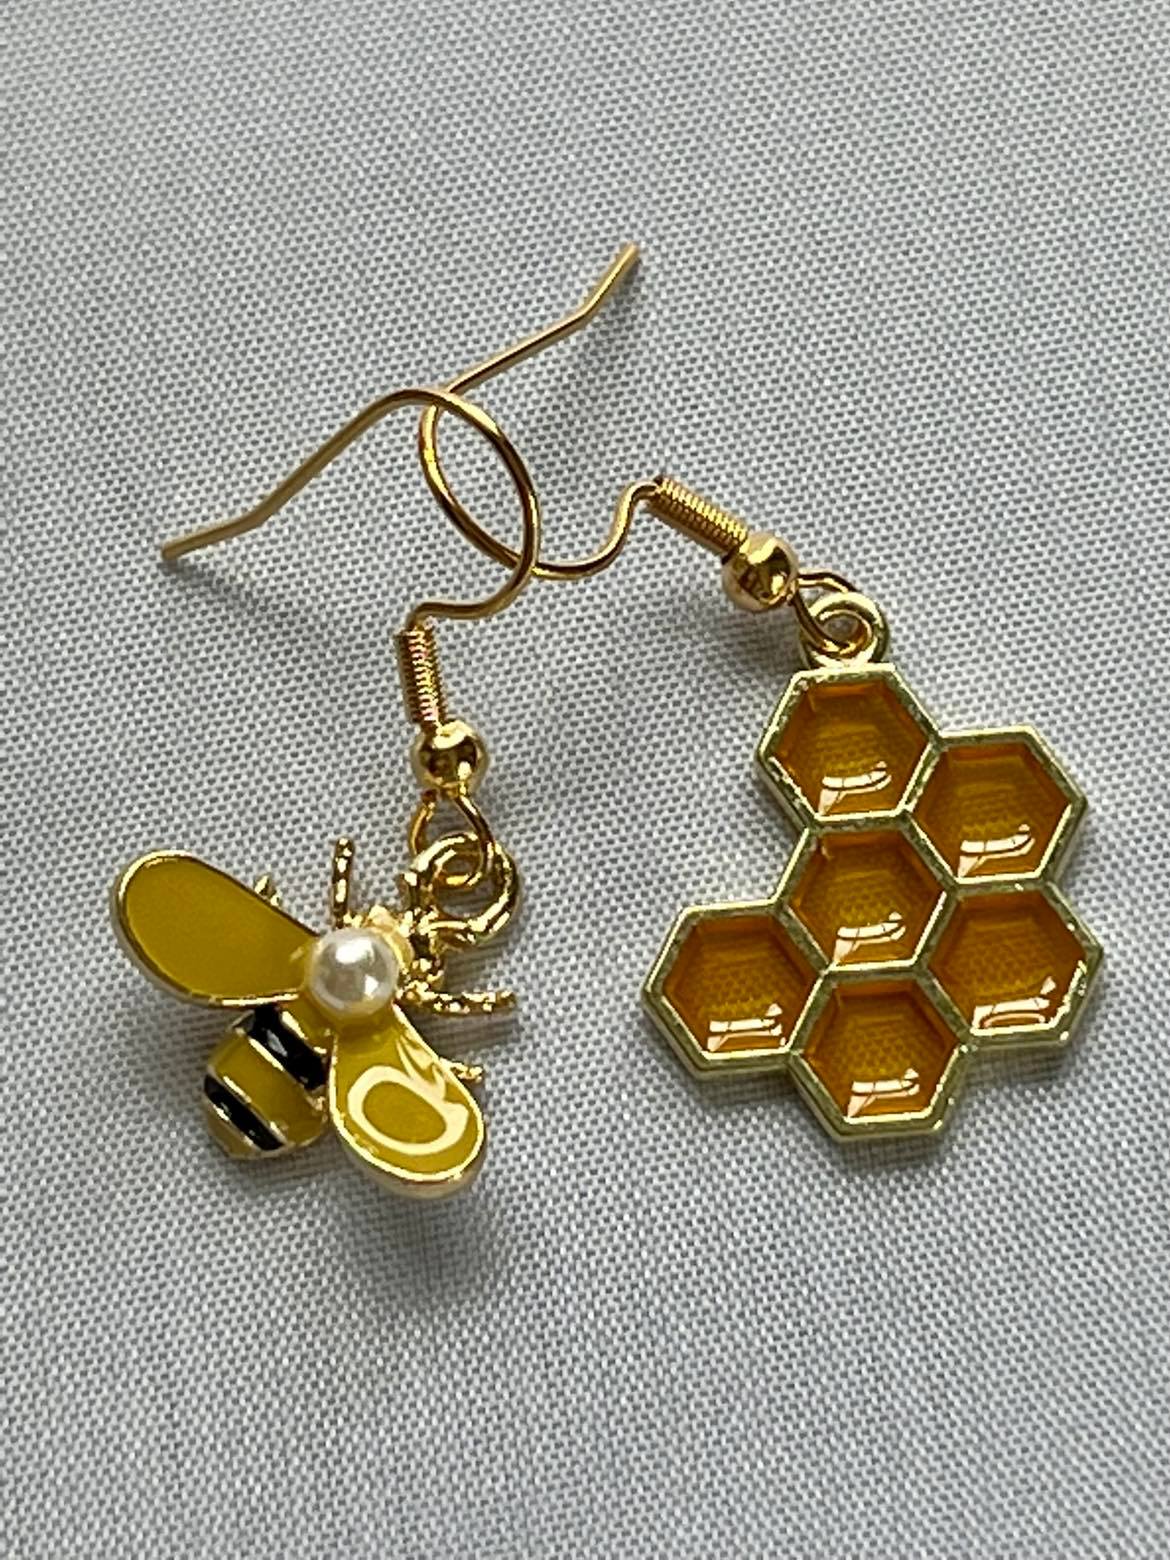 Dangling Honeycomb and Bee Earrings for sensitive ears - CYR'S CREATIONS